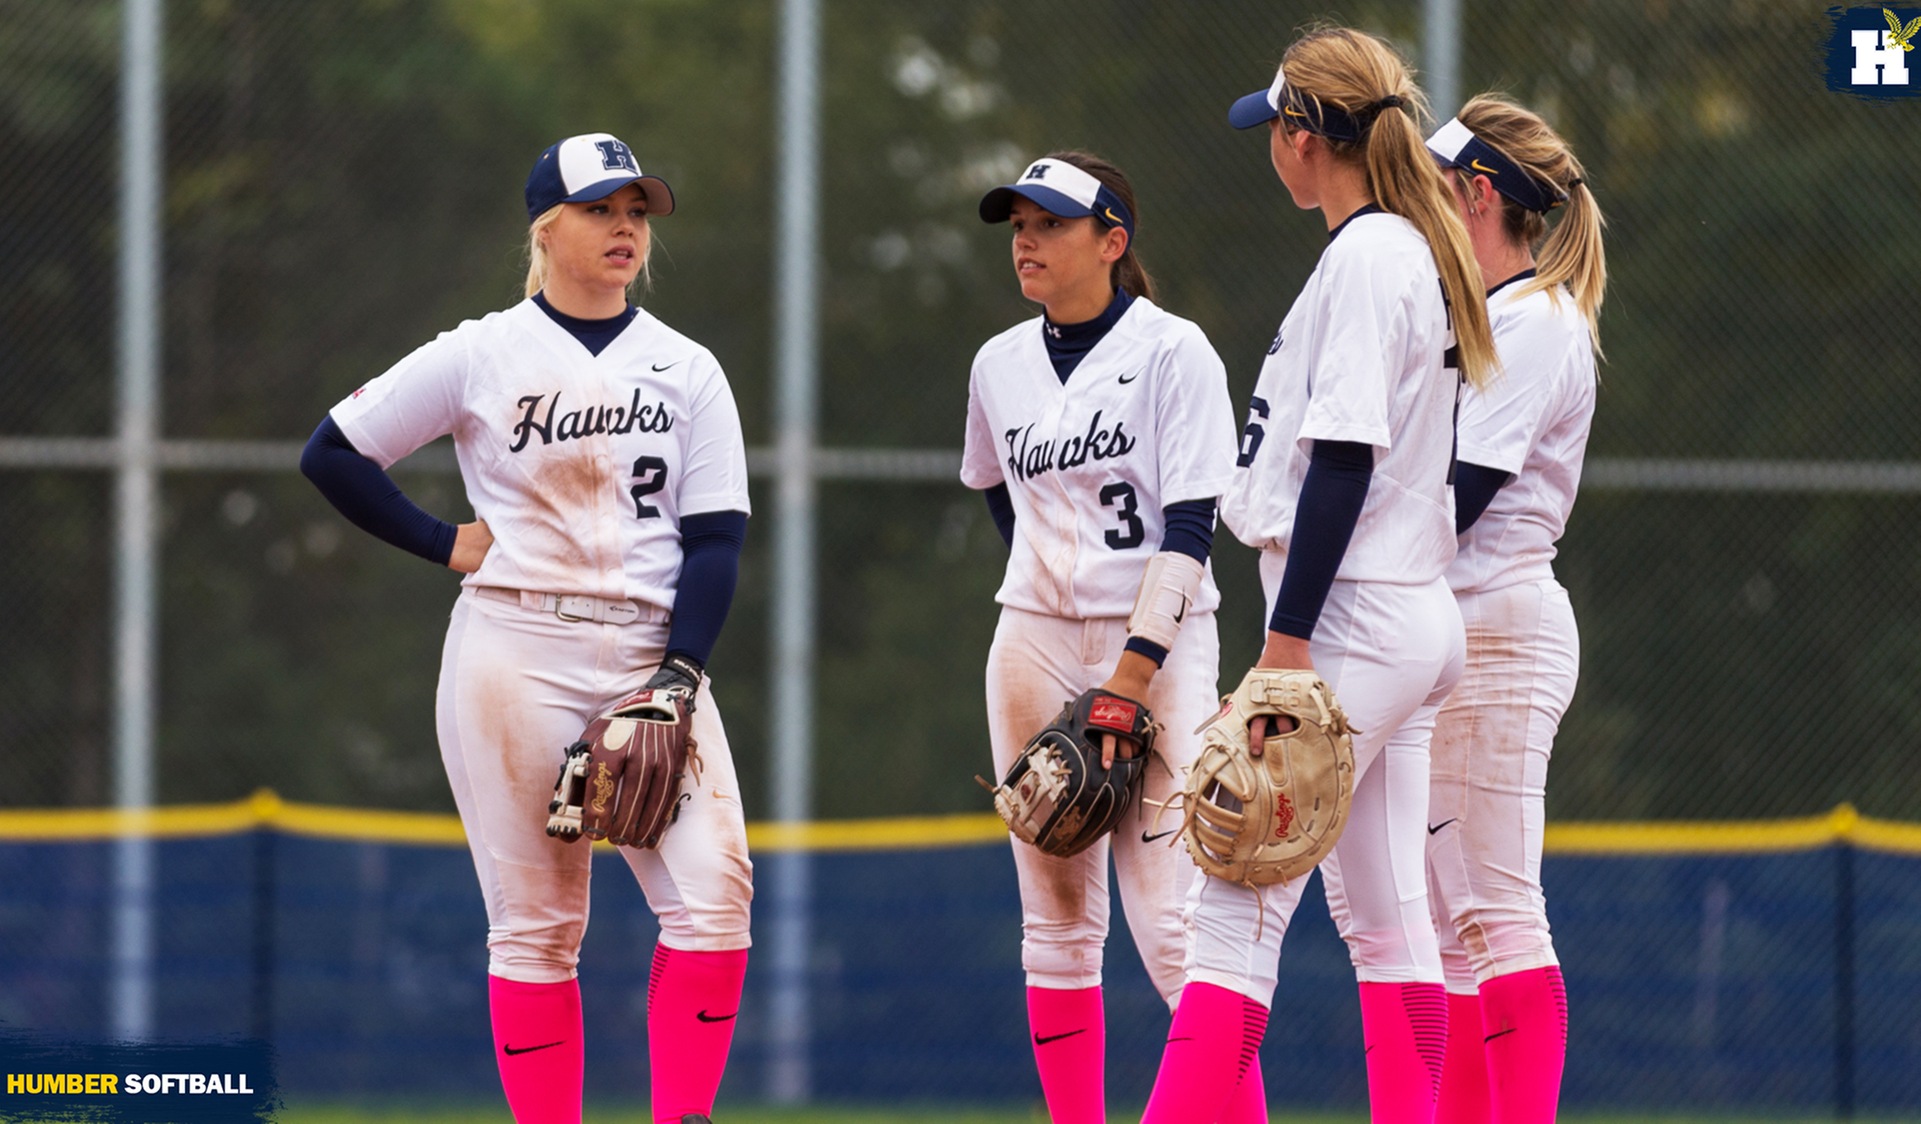 SOFTBALL TO CONCLUDE ROAD SCHEDULE FRIDAY AT CONESTOGA